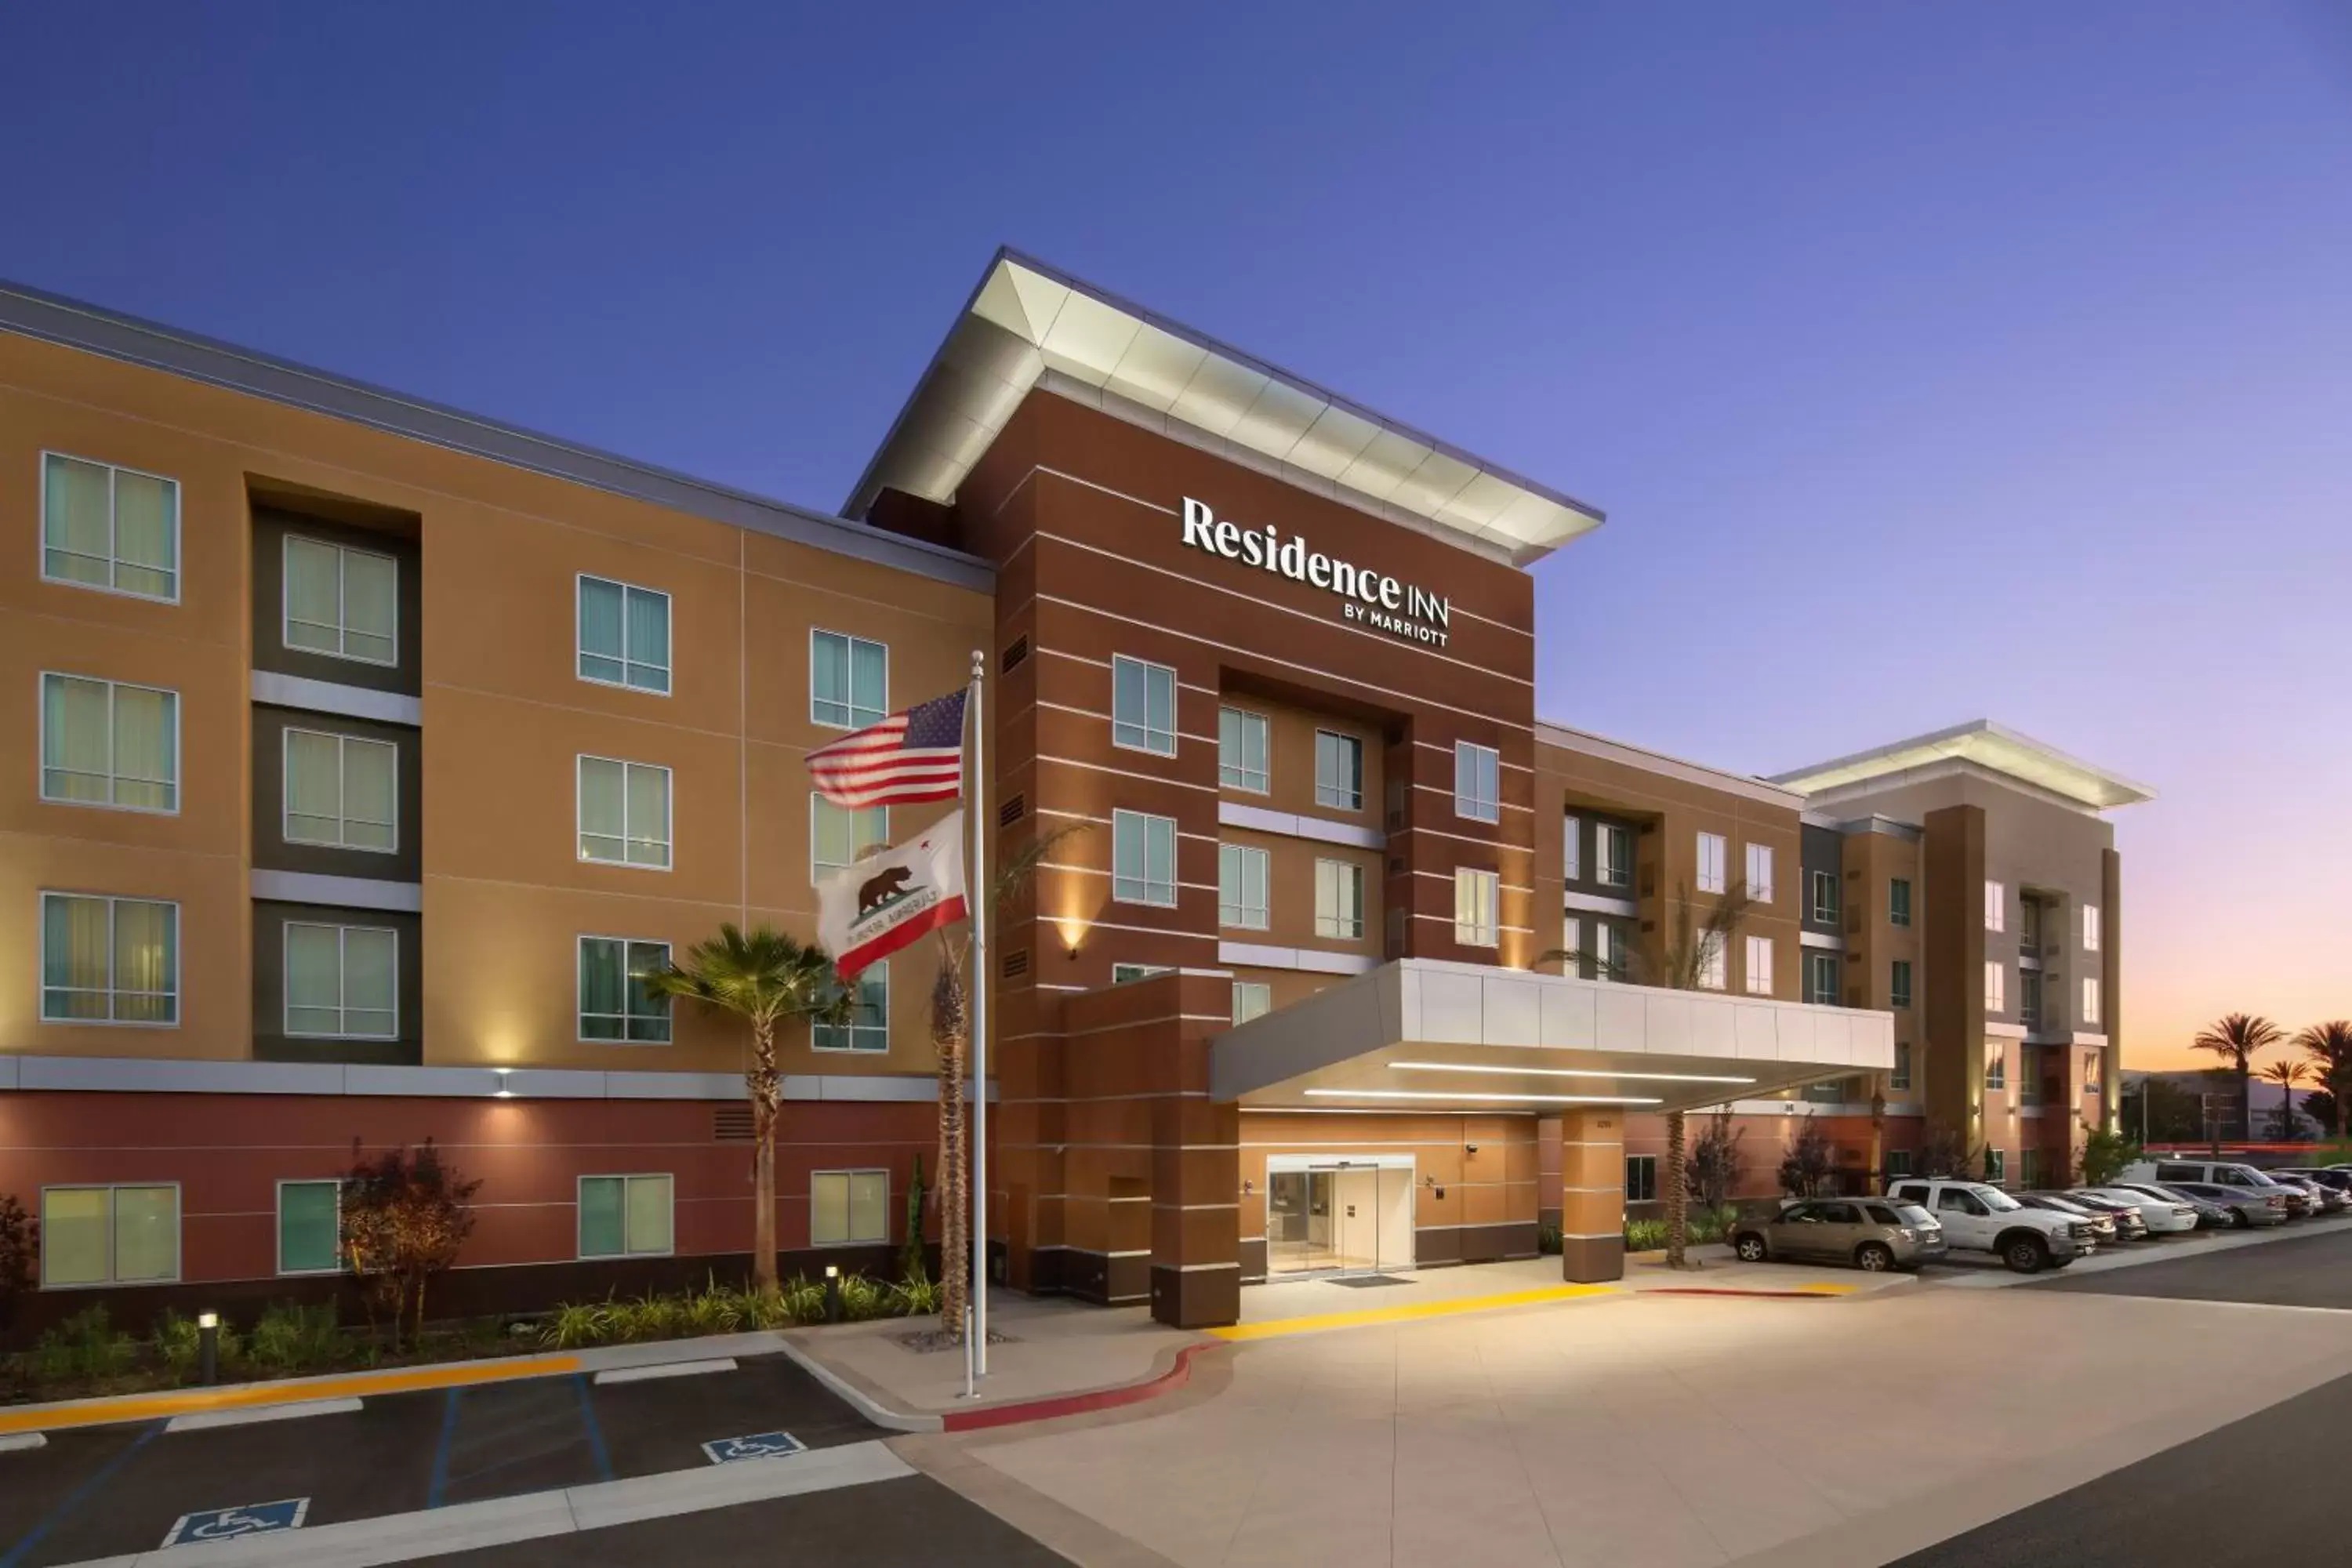 Property building in Residence Inn by Marriott Ontario Rancho Cucamonga